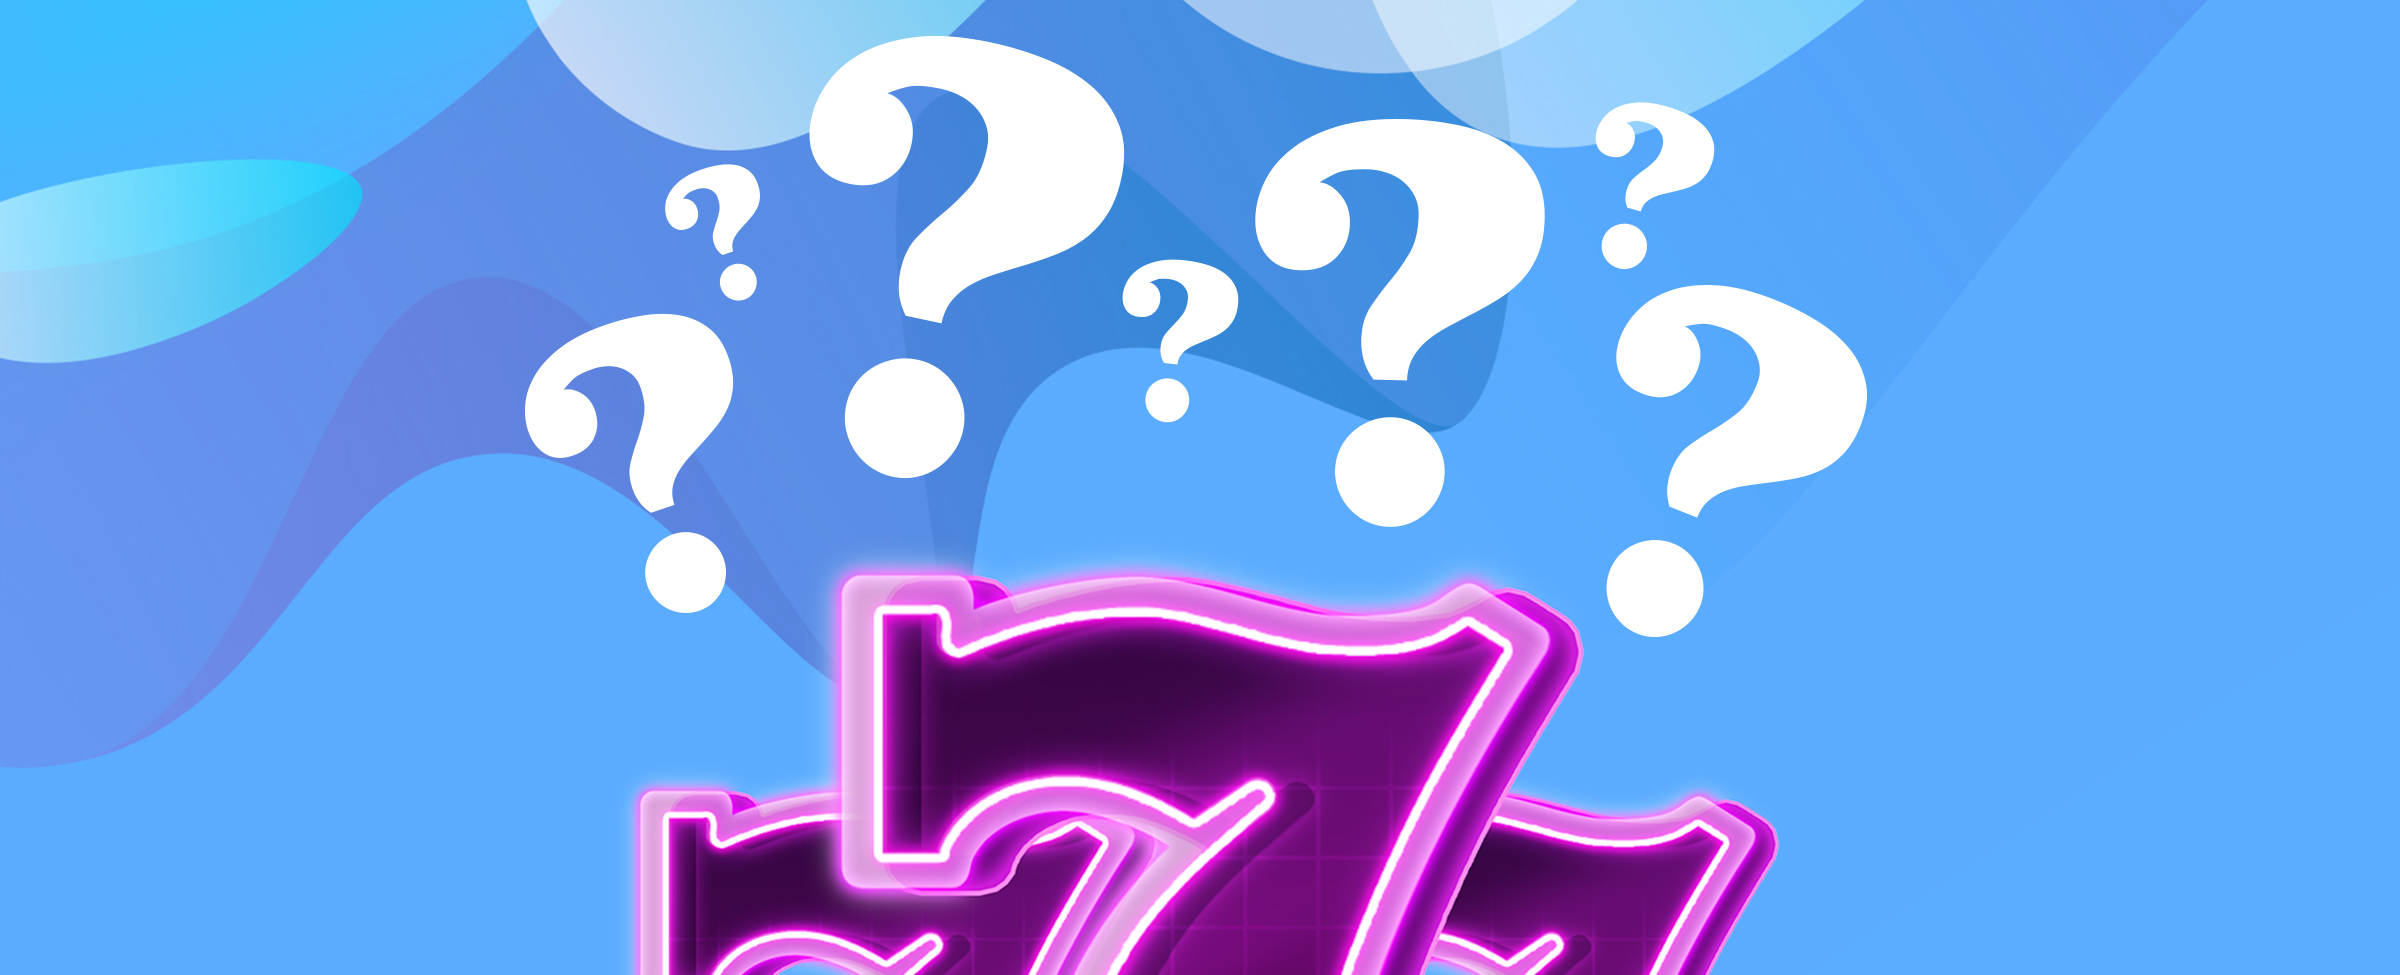 Can you guess this all-time classic slot game? If you’re a long-time player, chances are you’ll pick this right away!